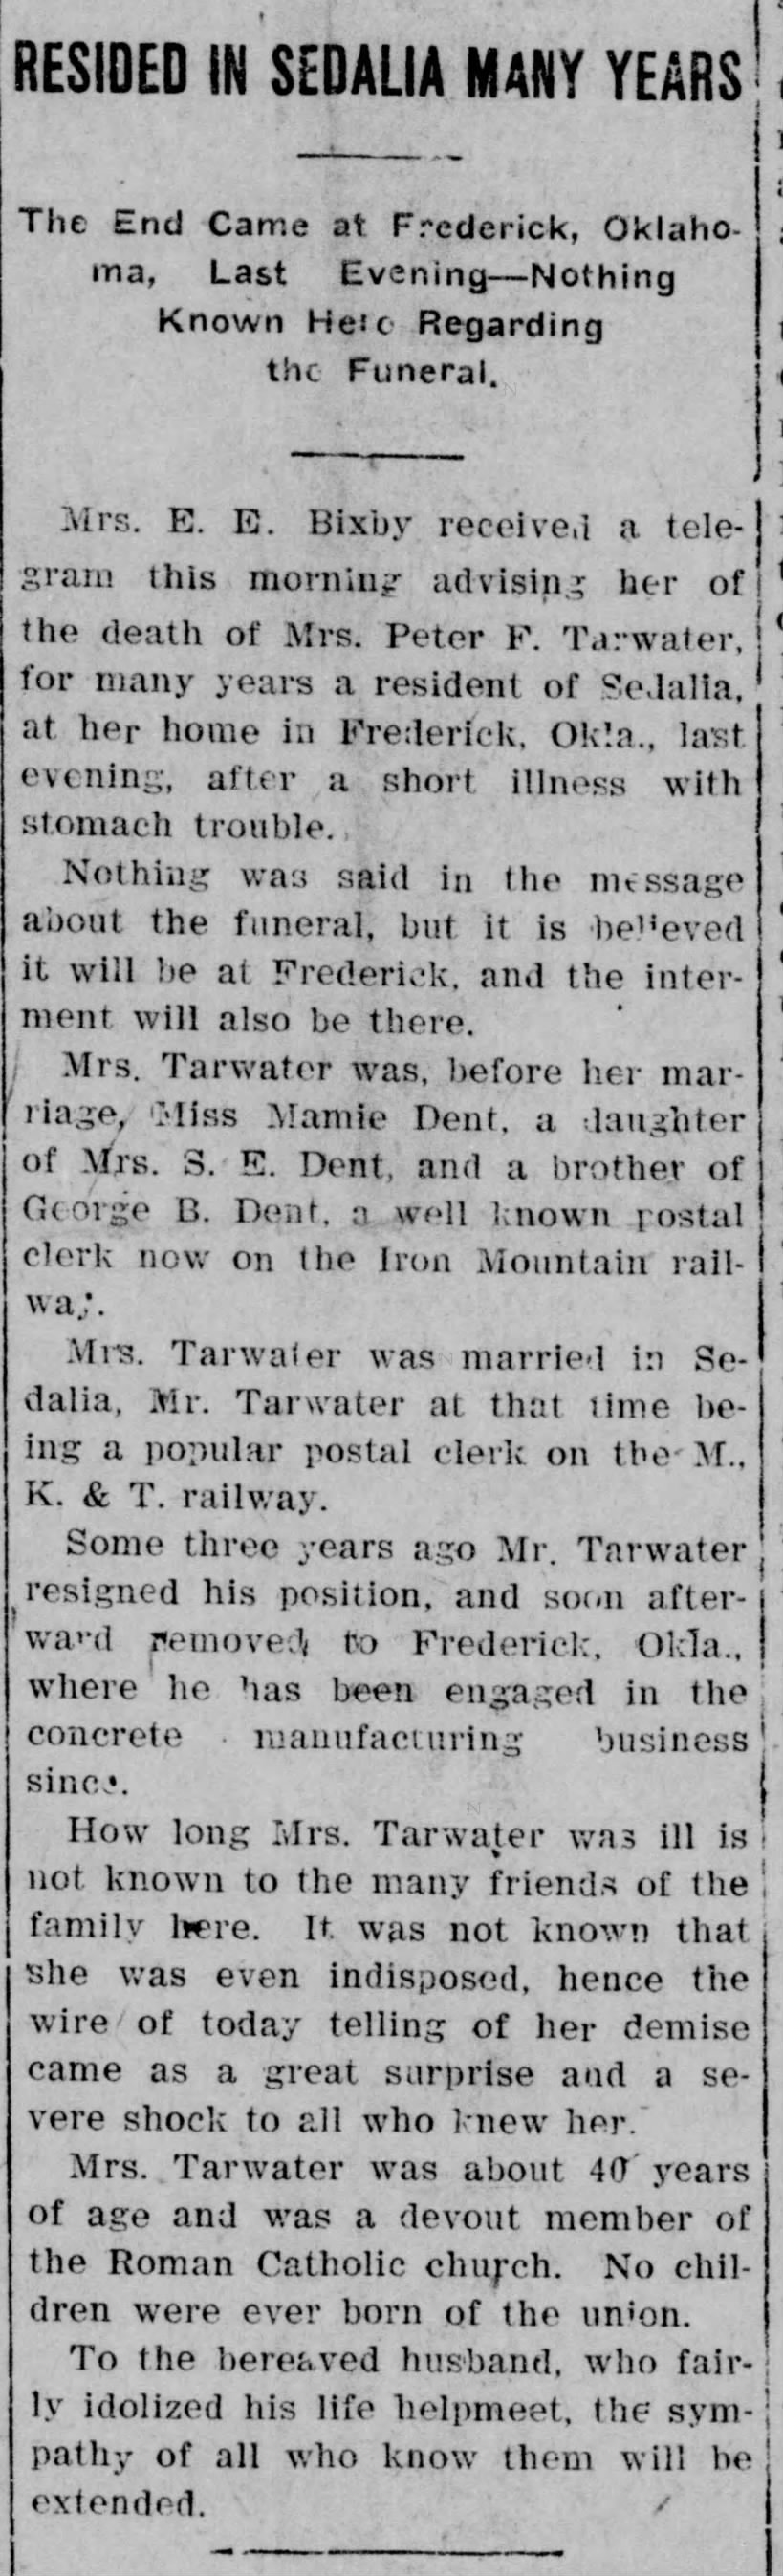 Details on Mamie Tarwater's death (wife of Peter)! The Sedalia Democrat 12/13/1907